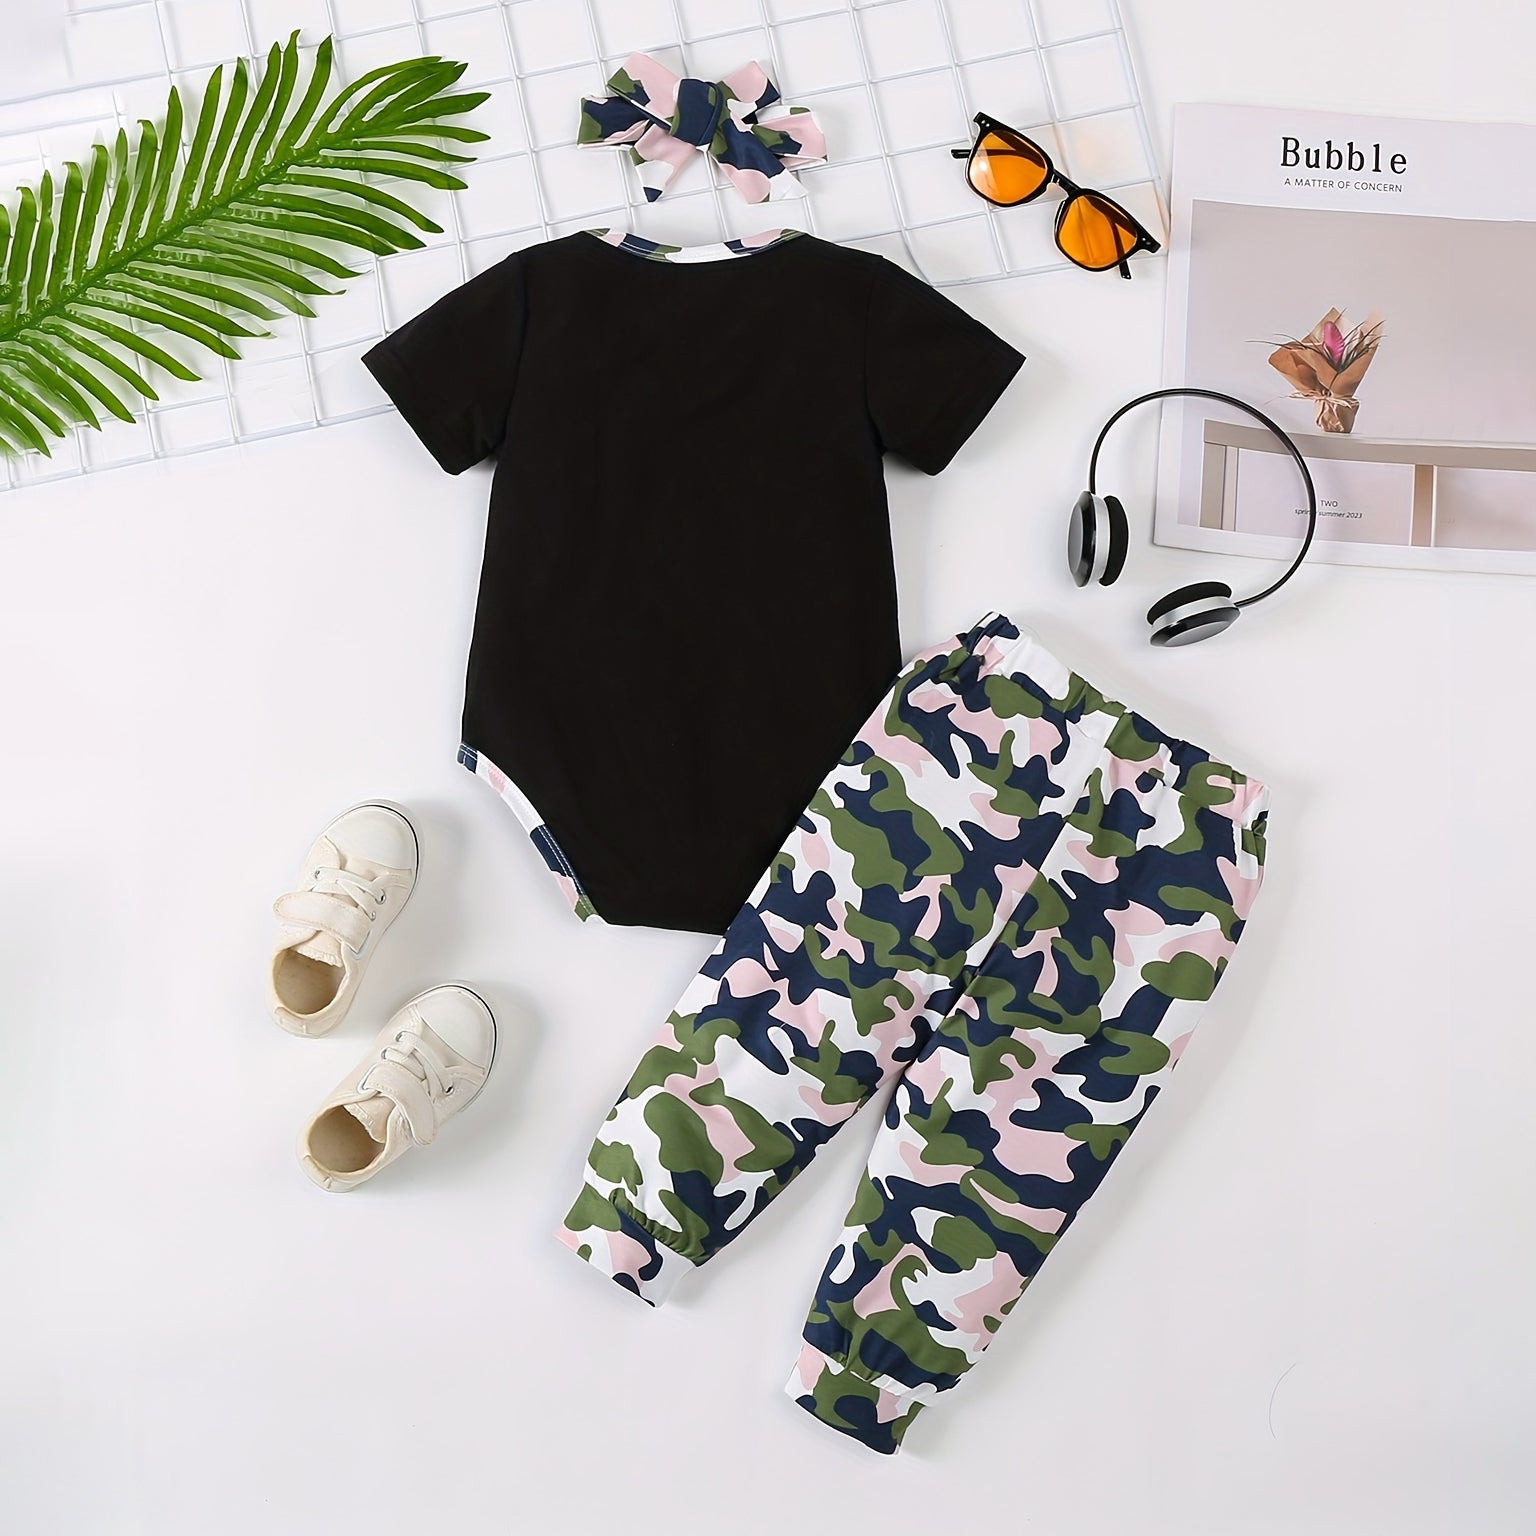 3PCS Ain't No Mama Like The One I Got Letter Camouflage Printed Baby Set